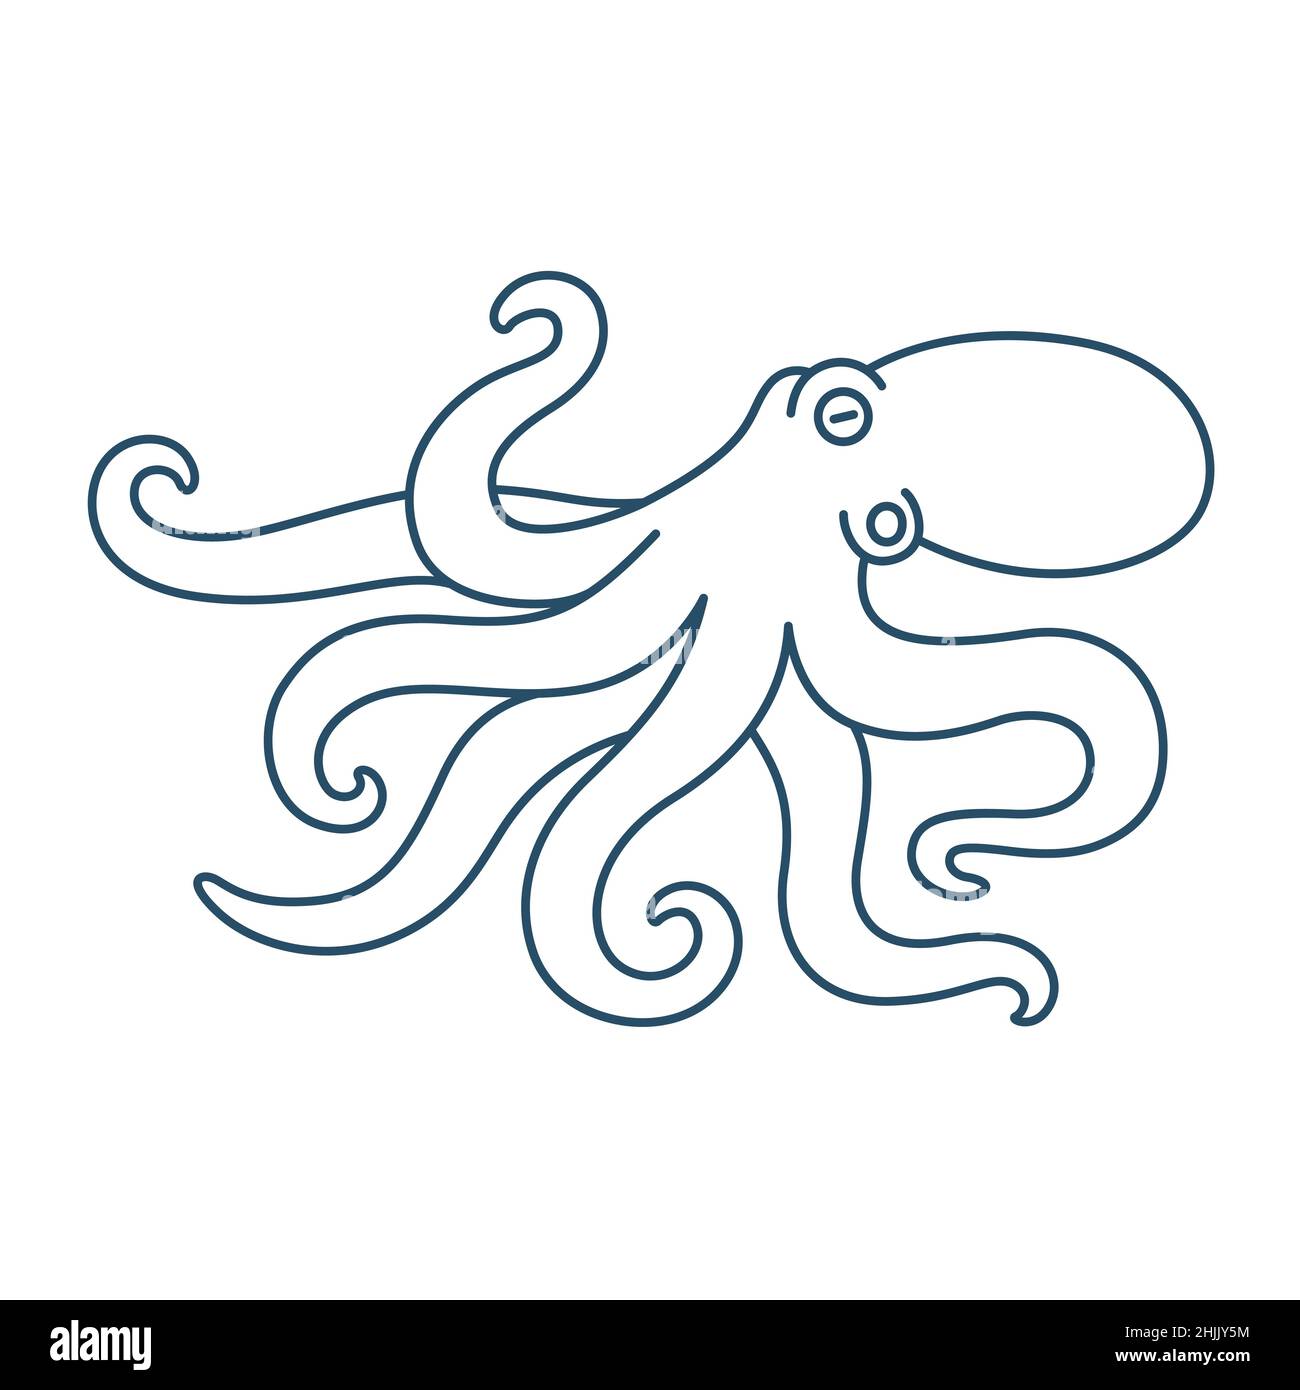 Octopus line art drawing. Simple design for print or logo. Isolated vector illustration. Stock Vector